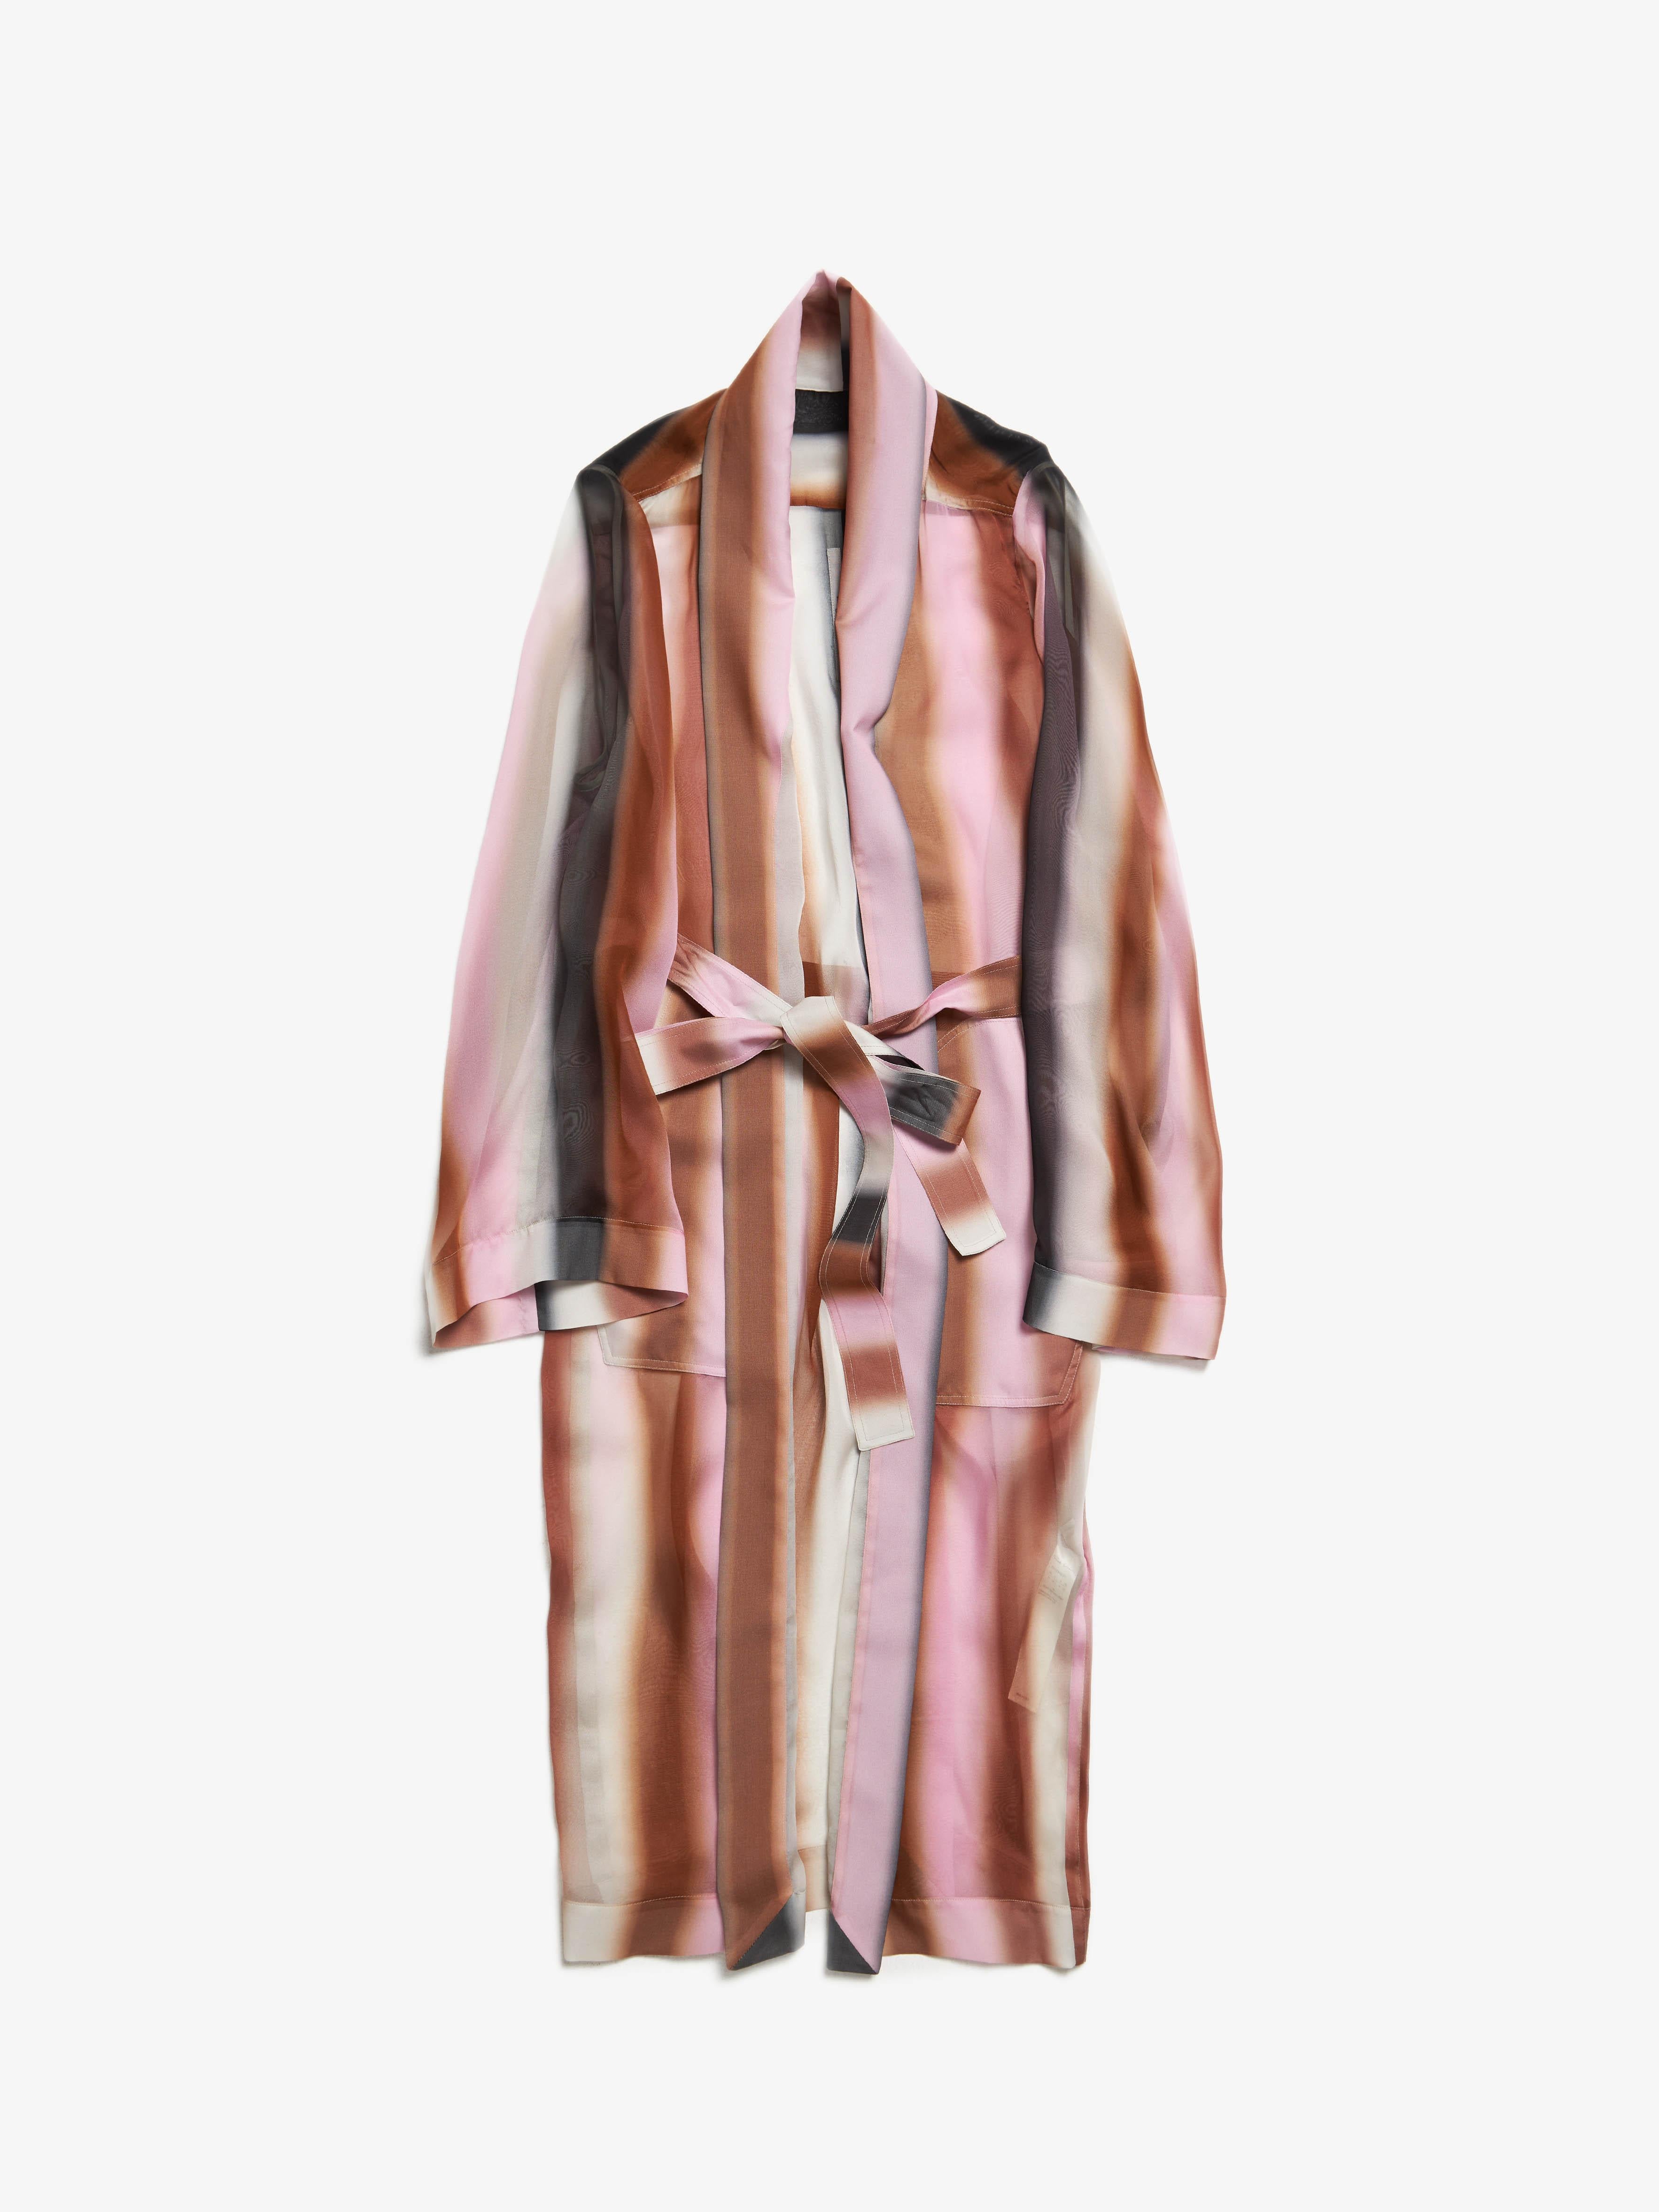 Rick Owens  SS21 Phlegethon Hued Degrade Printed Silk Robe
Size marked: 40
Condition: Gently used
Material: 100% Silk
Measurements: Shoulder to shoulder (cm) 45/ pit to pit (cm) 60/ Length (cm) 129/ sleeve (cm) 63
(134574)